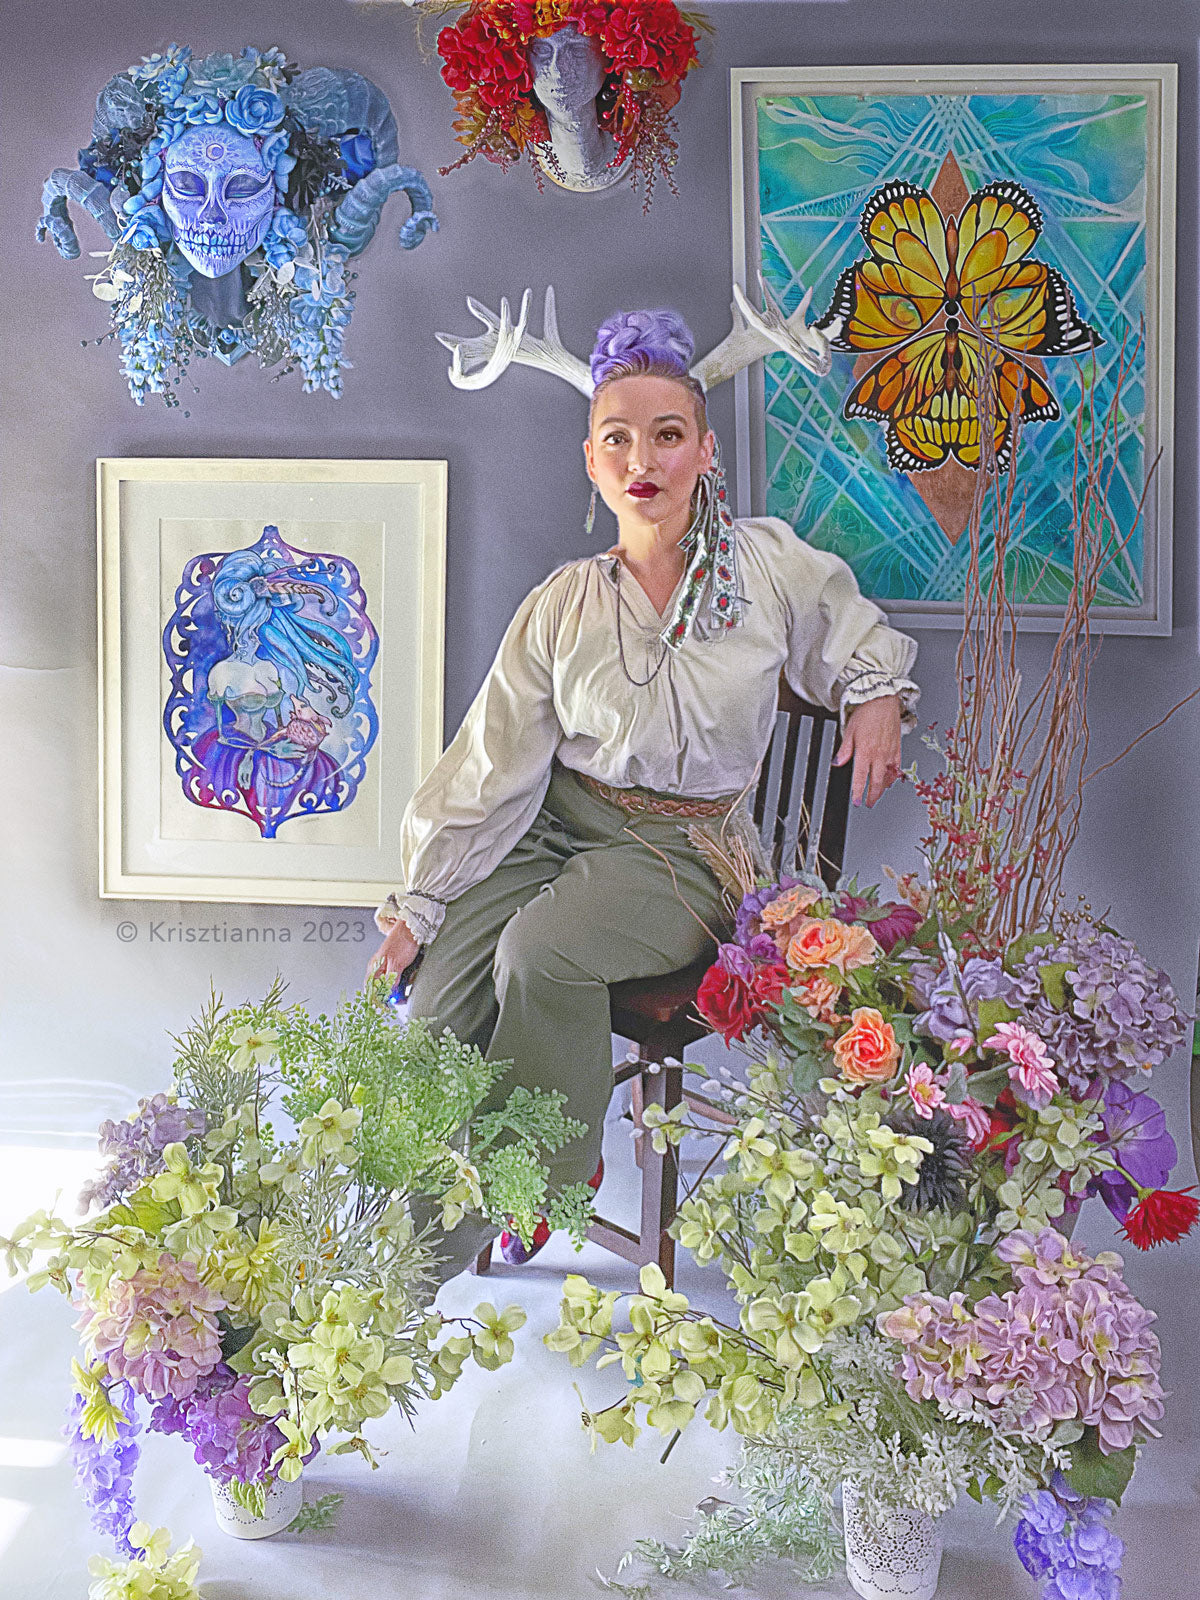 Krisztianna the artist sits in her studio amidst her flower materials and paintings